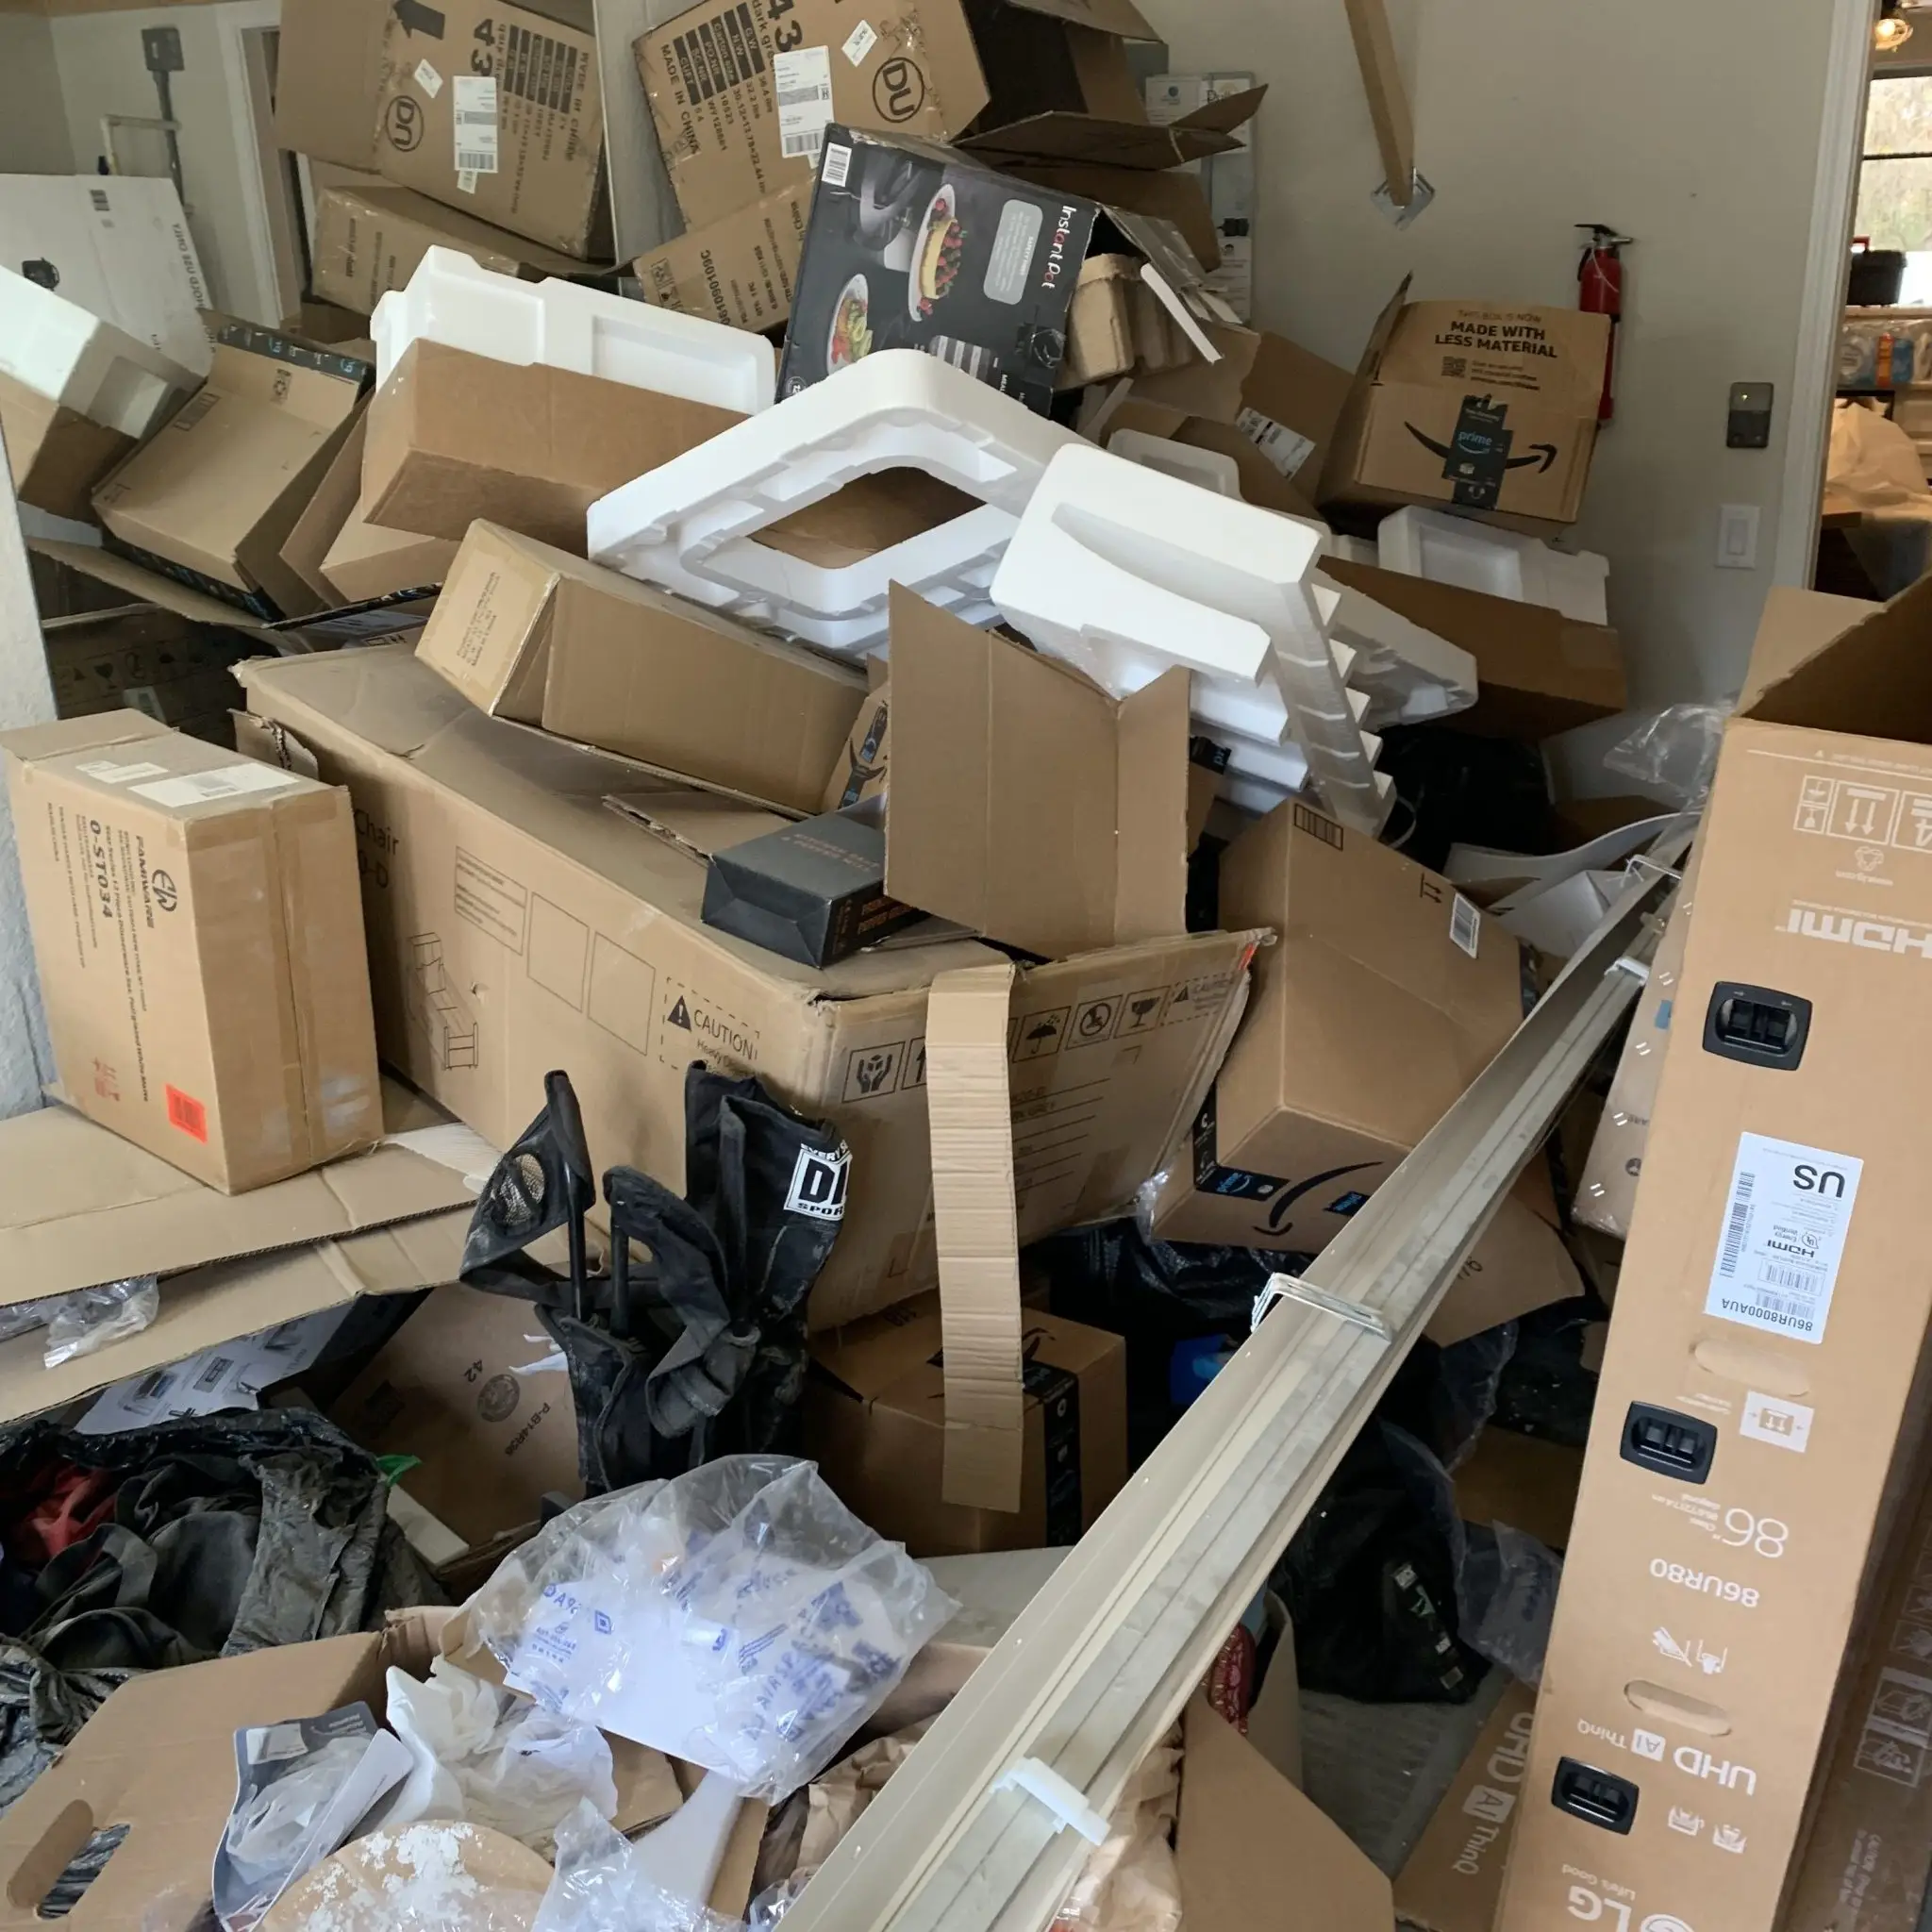 house clean outs garage cleanout junk removalist junk removal haul junk away house clean outs garage cleanout garage clean out house cleanouts house cleanout pickup junk junk pickups junk hauling near me